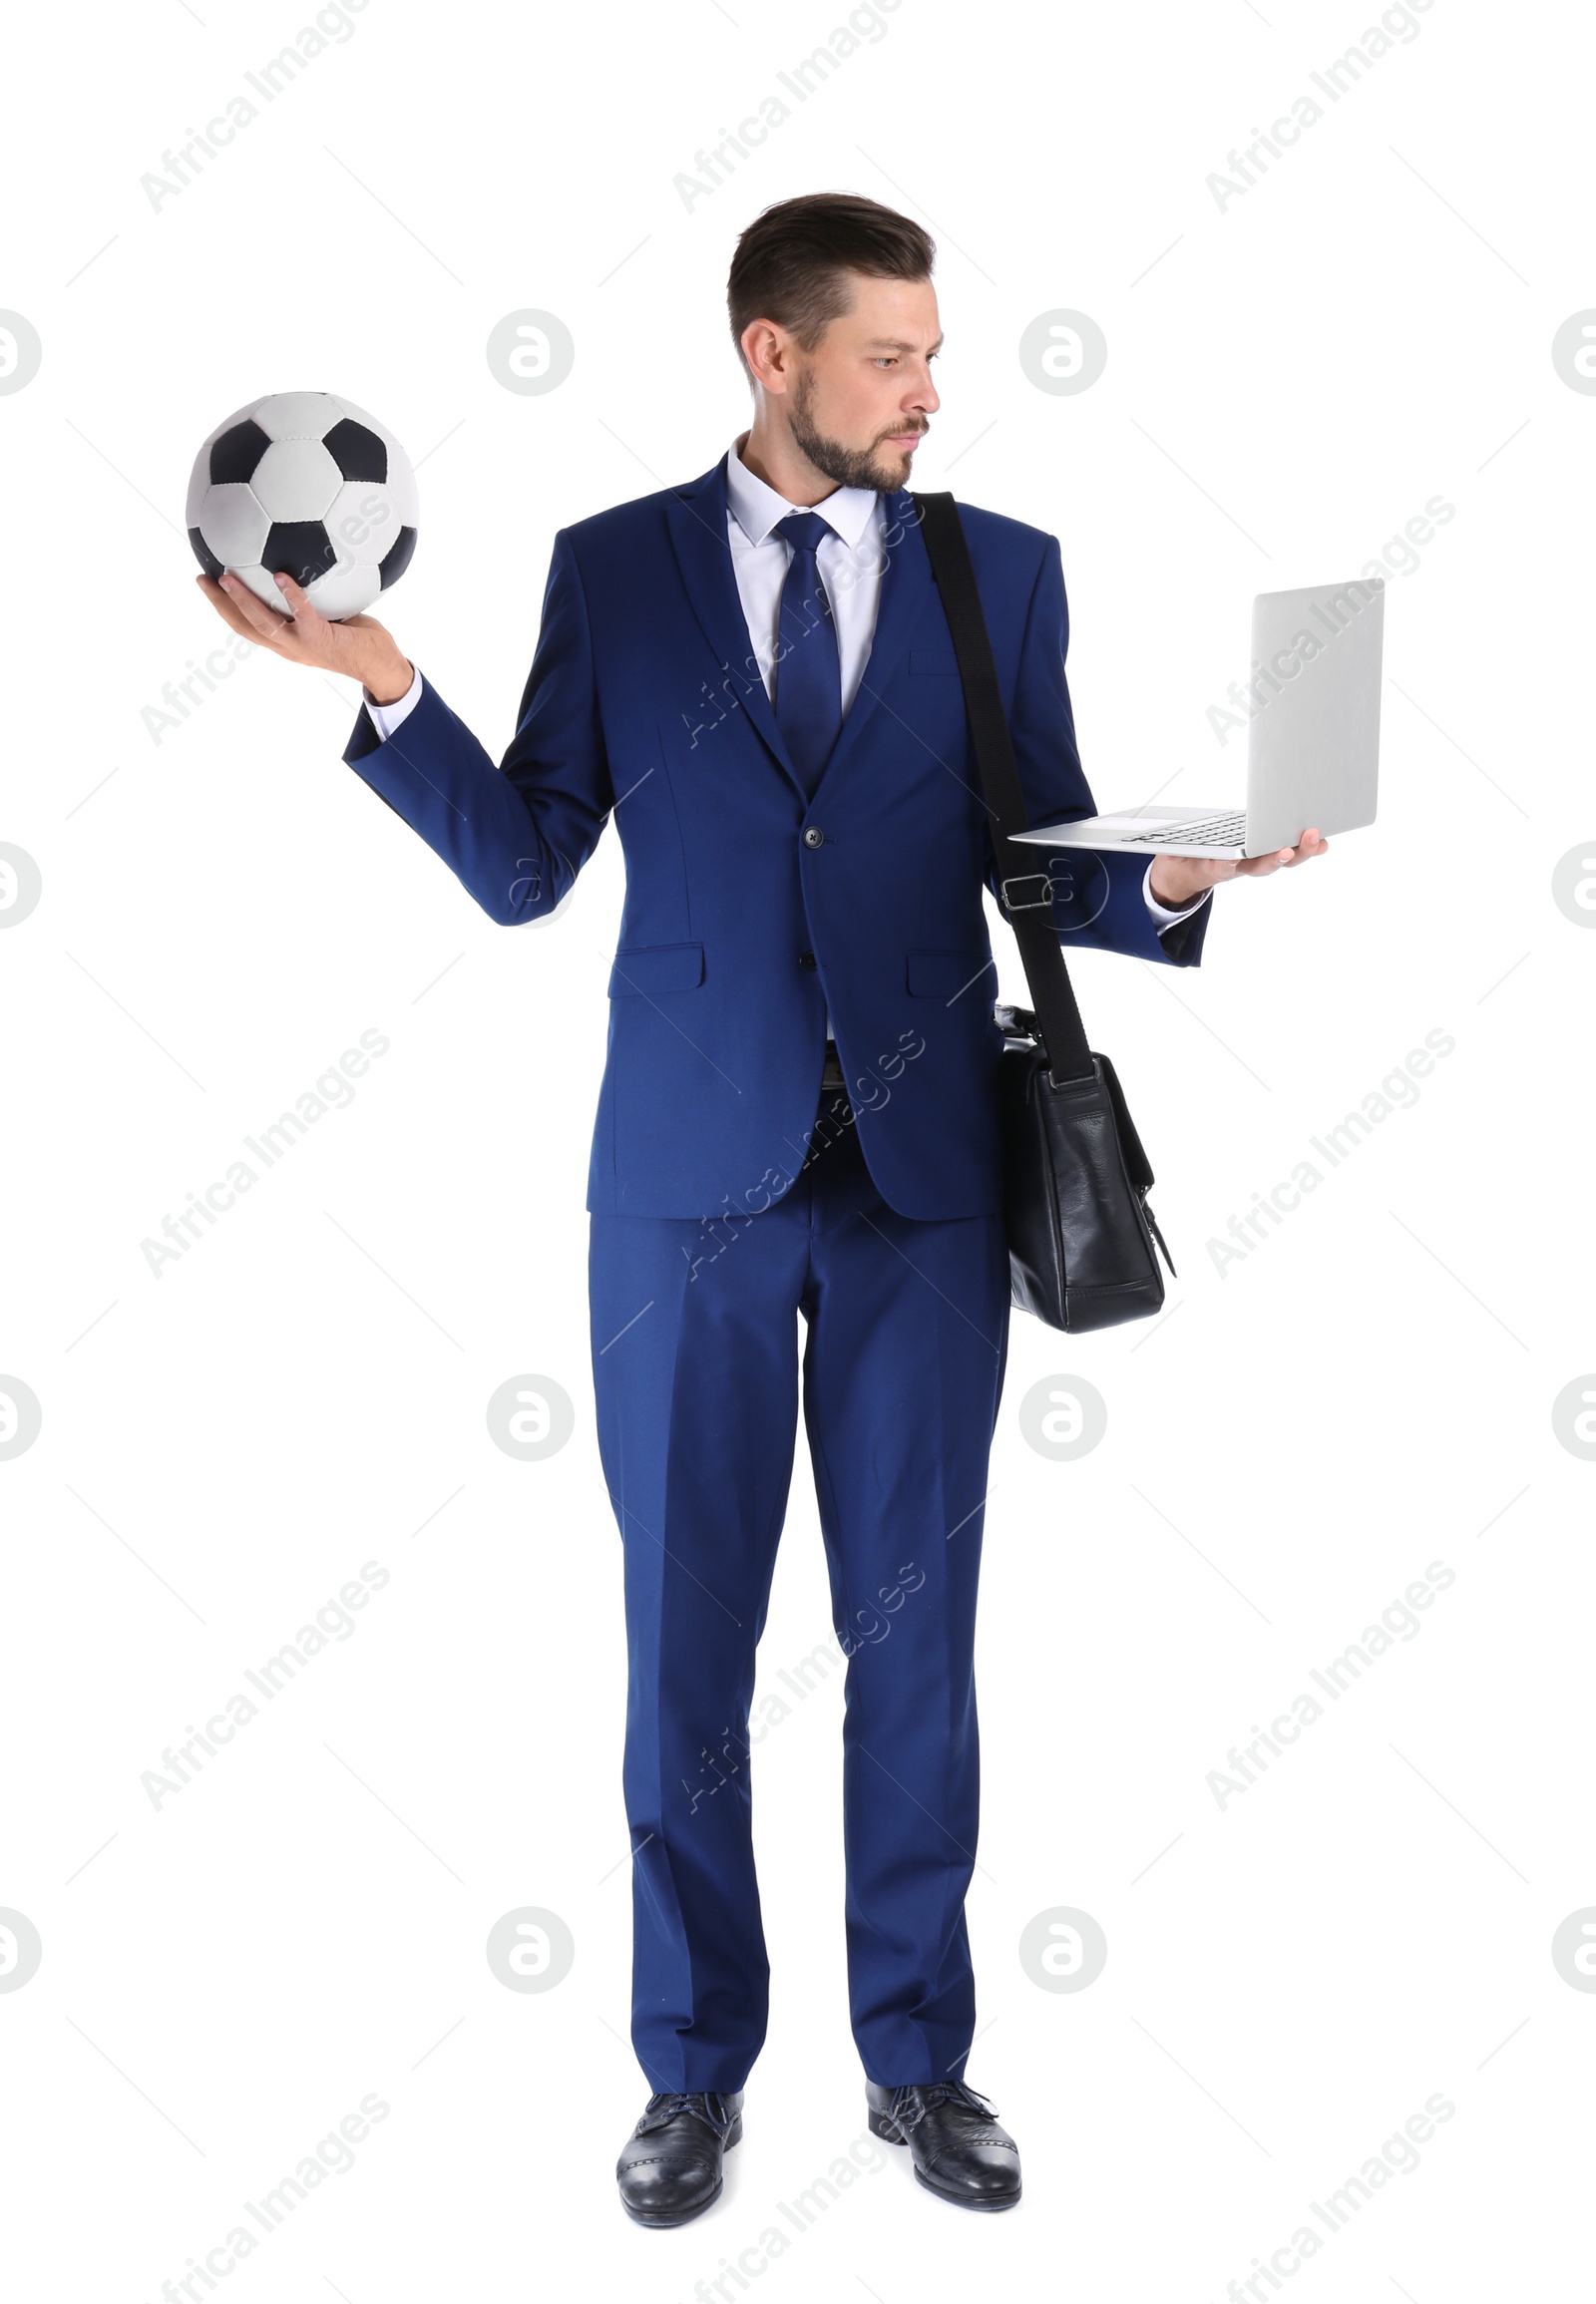 Photo of Full length portrait of businessman with briefcase, soccer ball and laptop on white background. Combining life and work